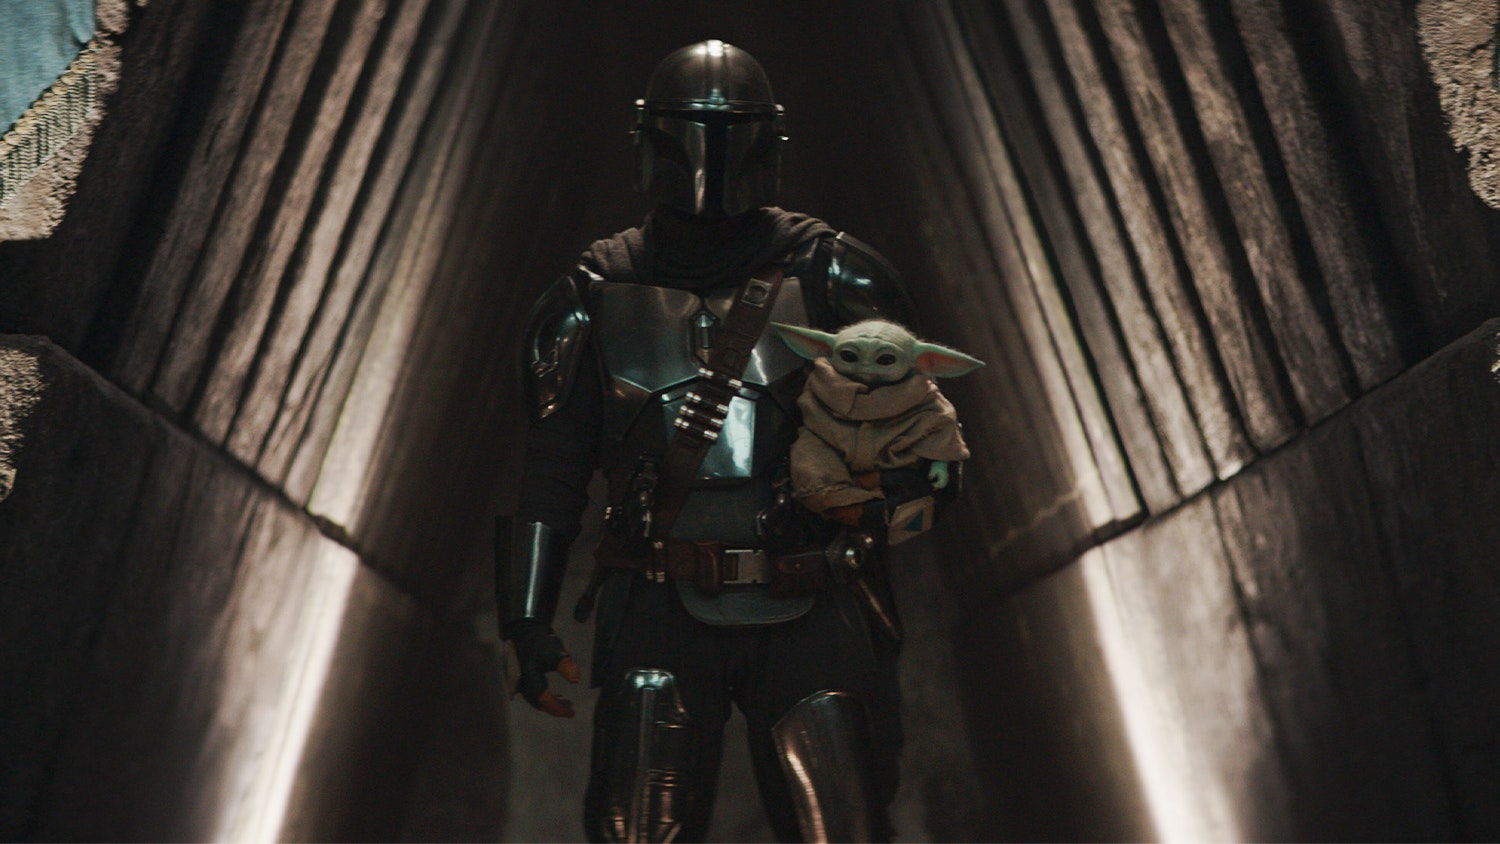 The Mandalorian is back tomorrow - which other Star Wars projects